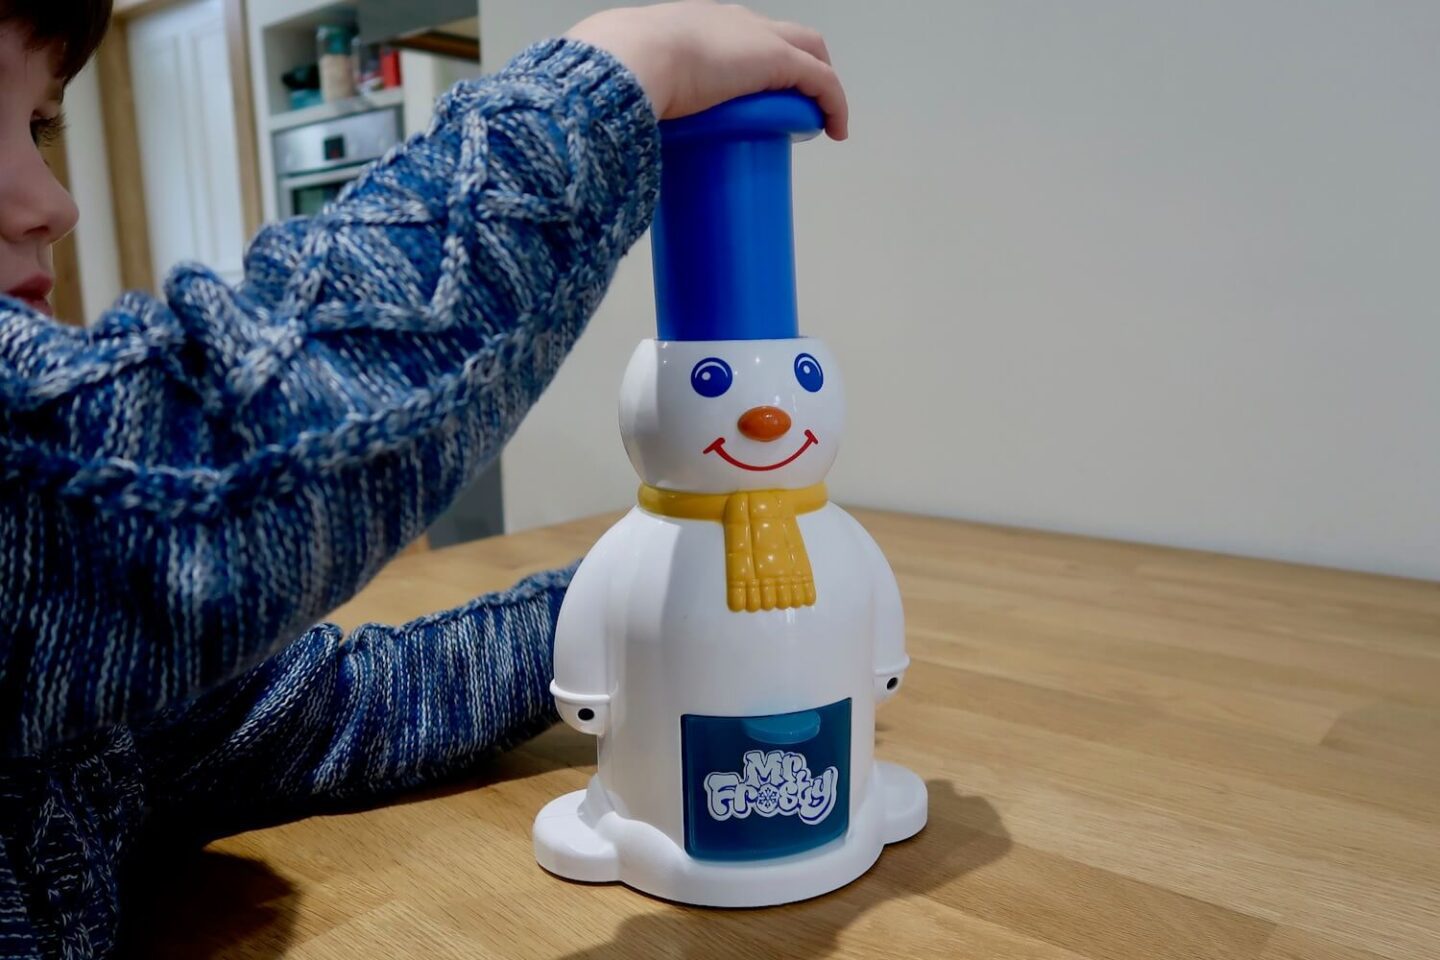 Generic Flair Mr Frosty The Ice Crunchy Maker Party & Fun Games